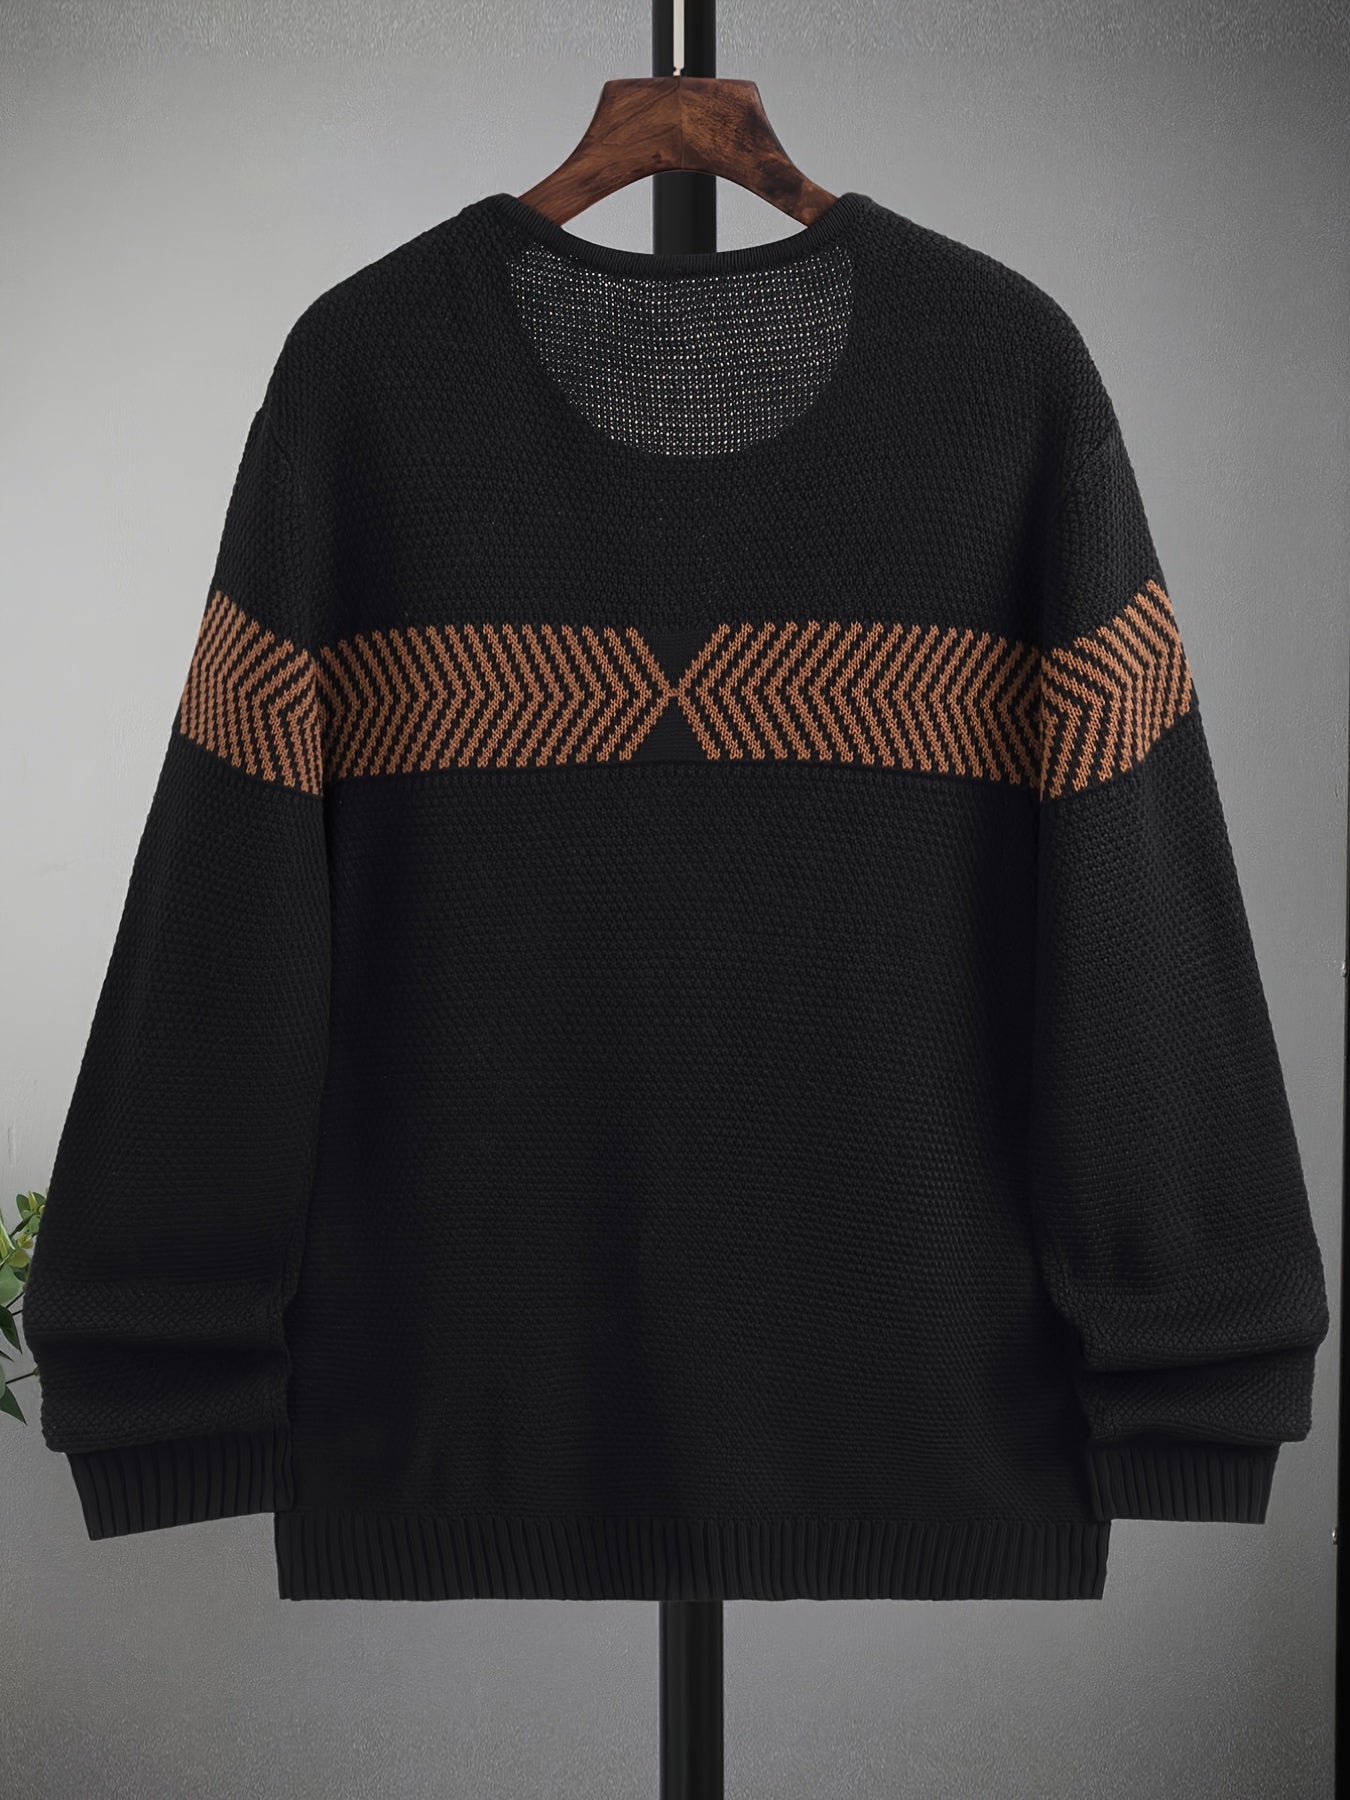 Autumn And Winter Men's Knit Sweater Casual Long Sleeve Black Sweater